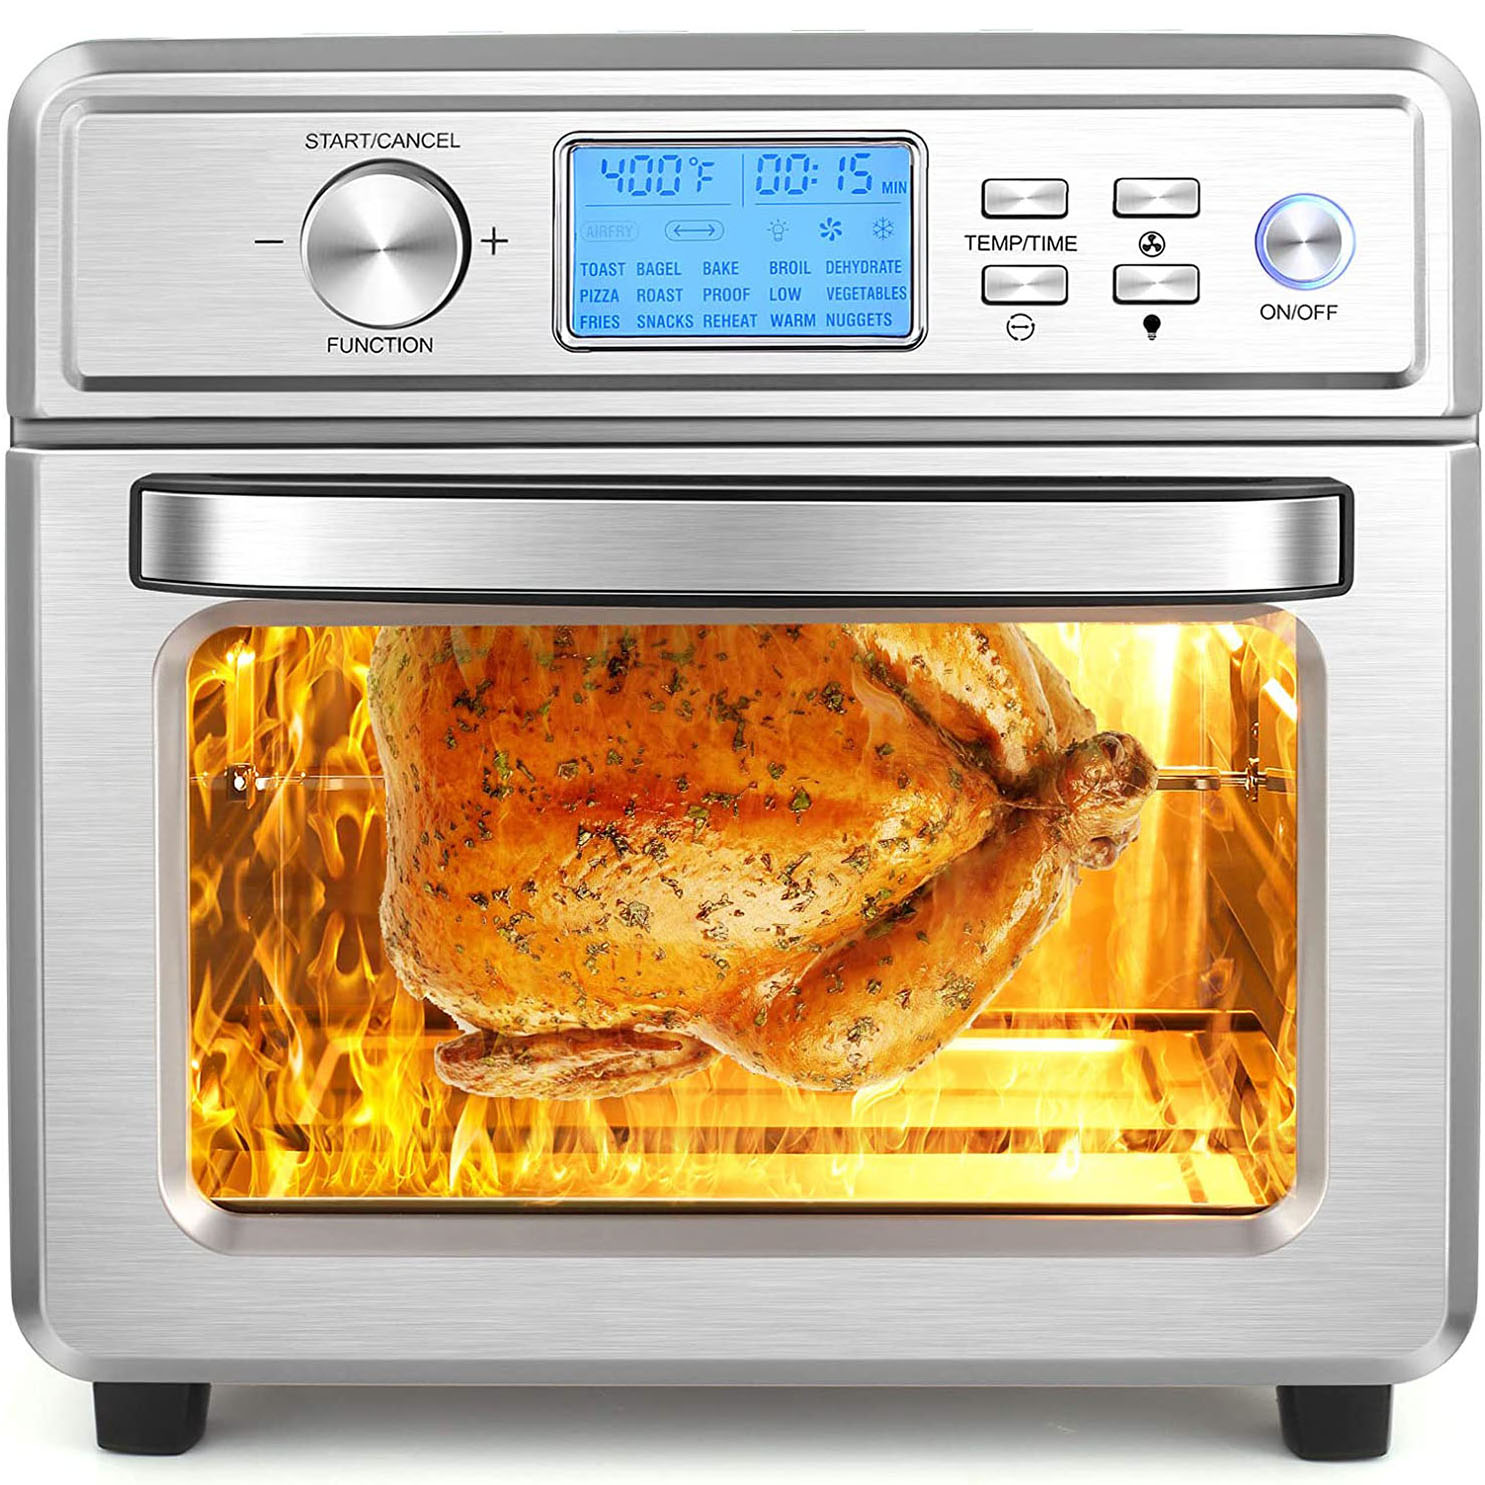 Nictemaw 24.5QT Air Fryer, 16-in-1 Air Fryer Oven, 1700W Electric Air Fryer Toaster Oven, Presets for Baking, with LED Display & Temperature/Time Dial, Roaster, Broiler, Rotisserie - image 1 of 11